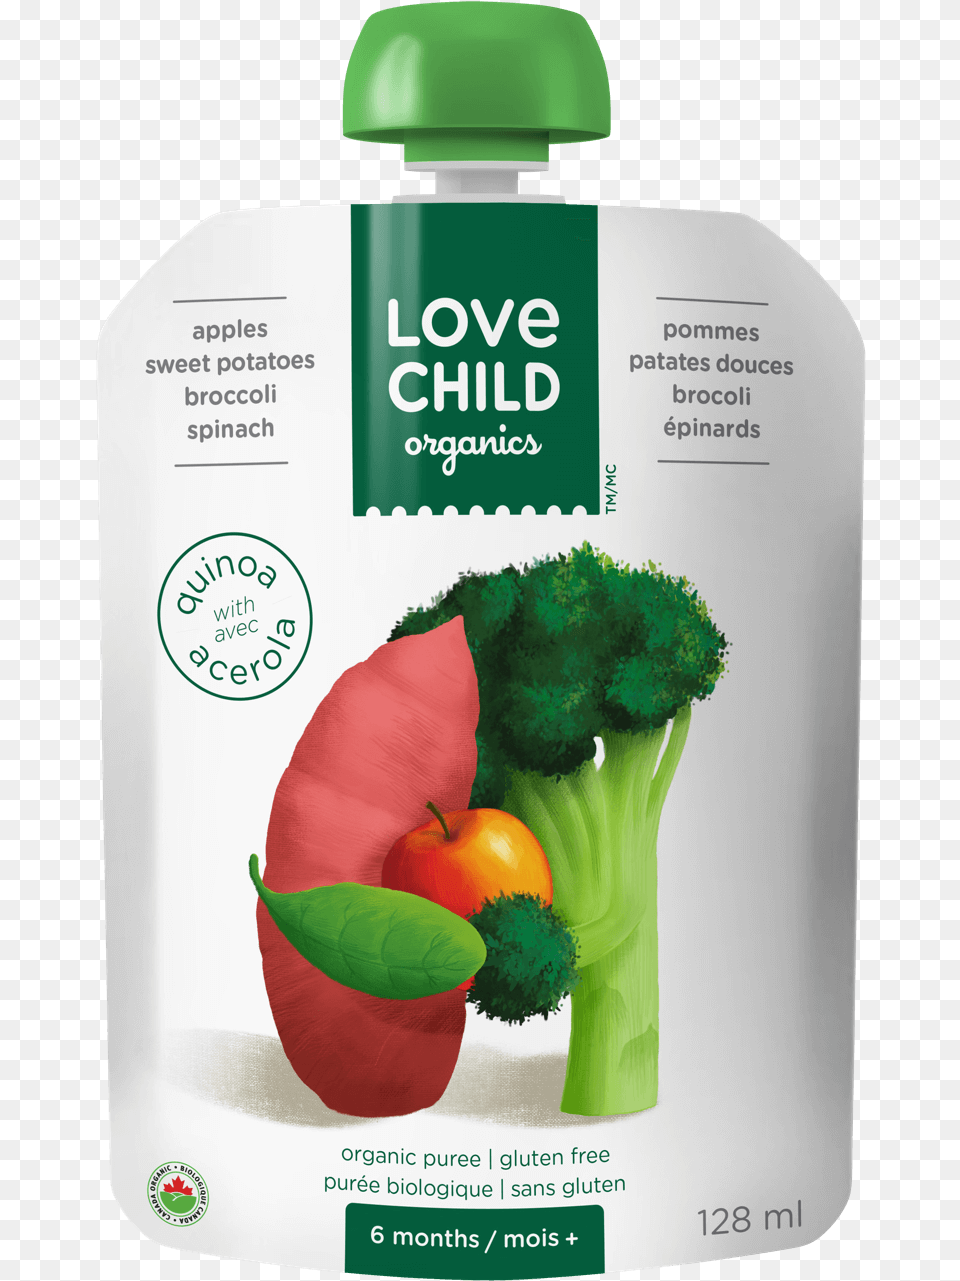 Apples Spinach Kiwi Broccoli U2022 Love Child Organics Love Child Organics Pouches, Food, Plant, Produce, Vegetable Free Png Download